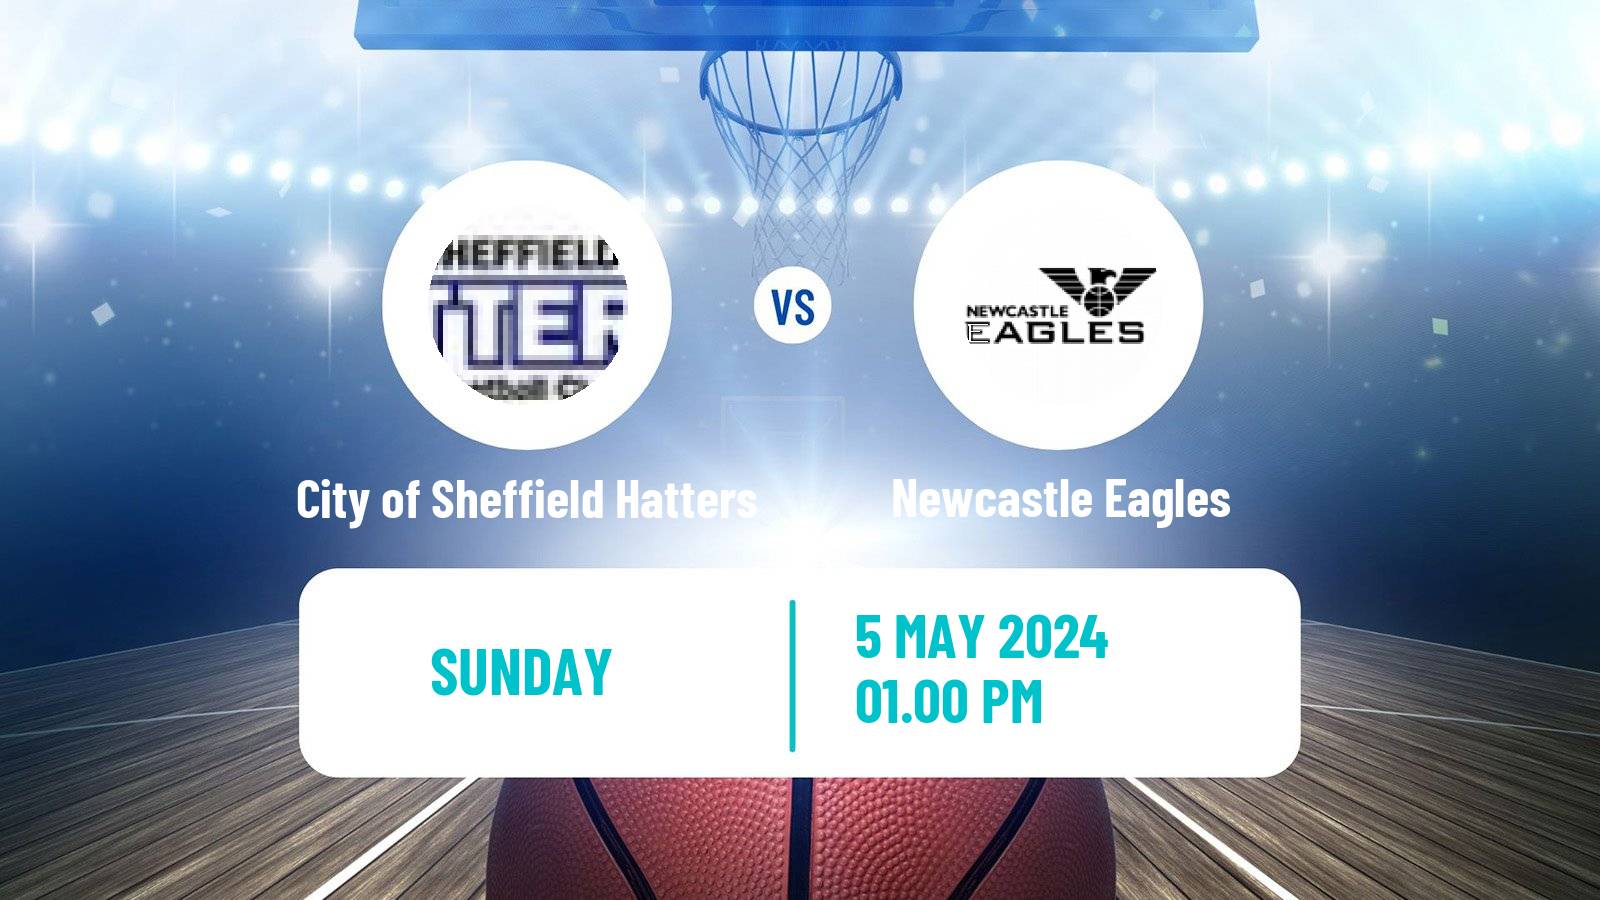 Basketball British WBBL City of Sheffield Hatters - Newcastle Eagles